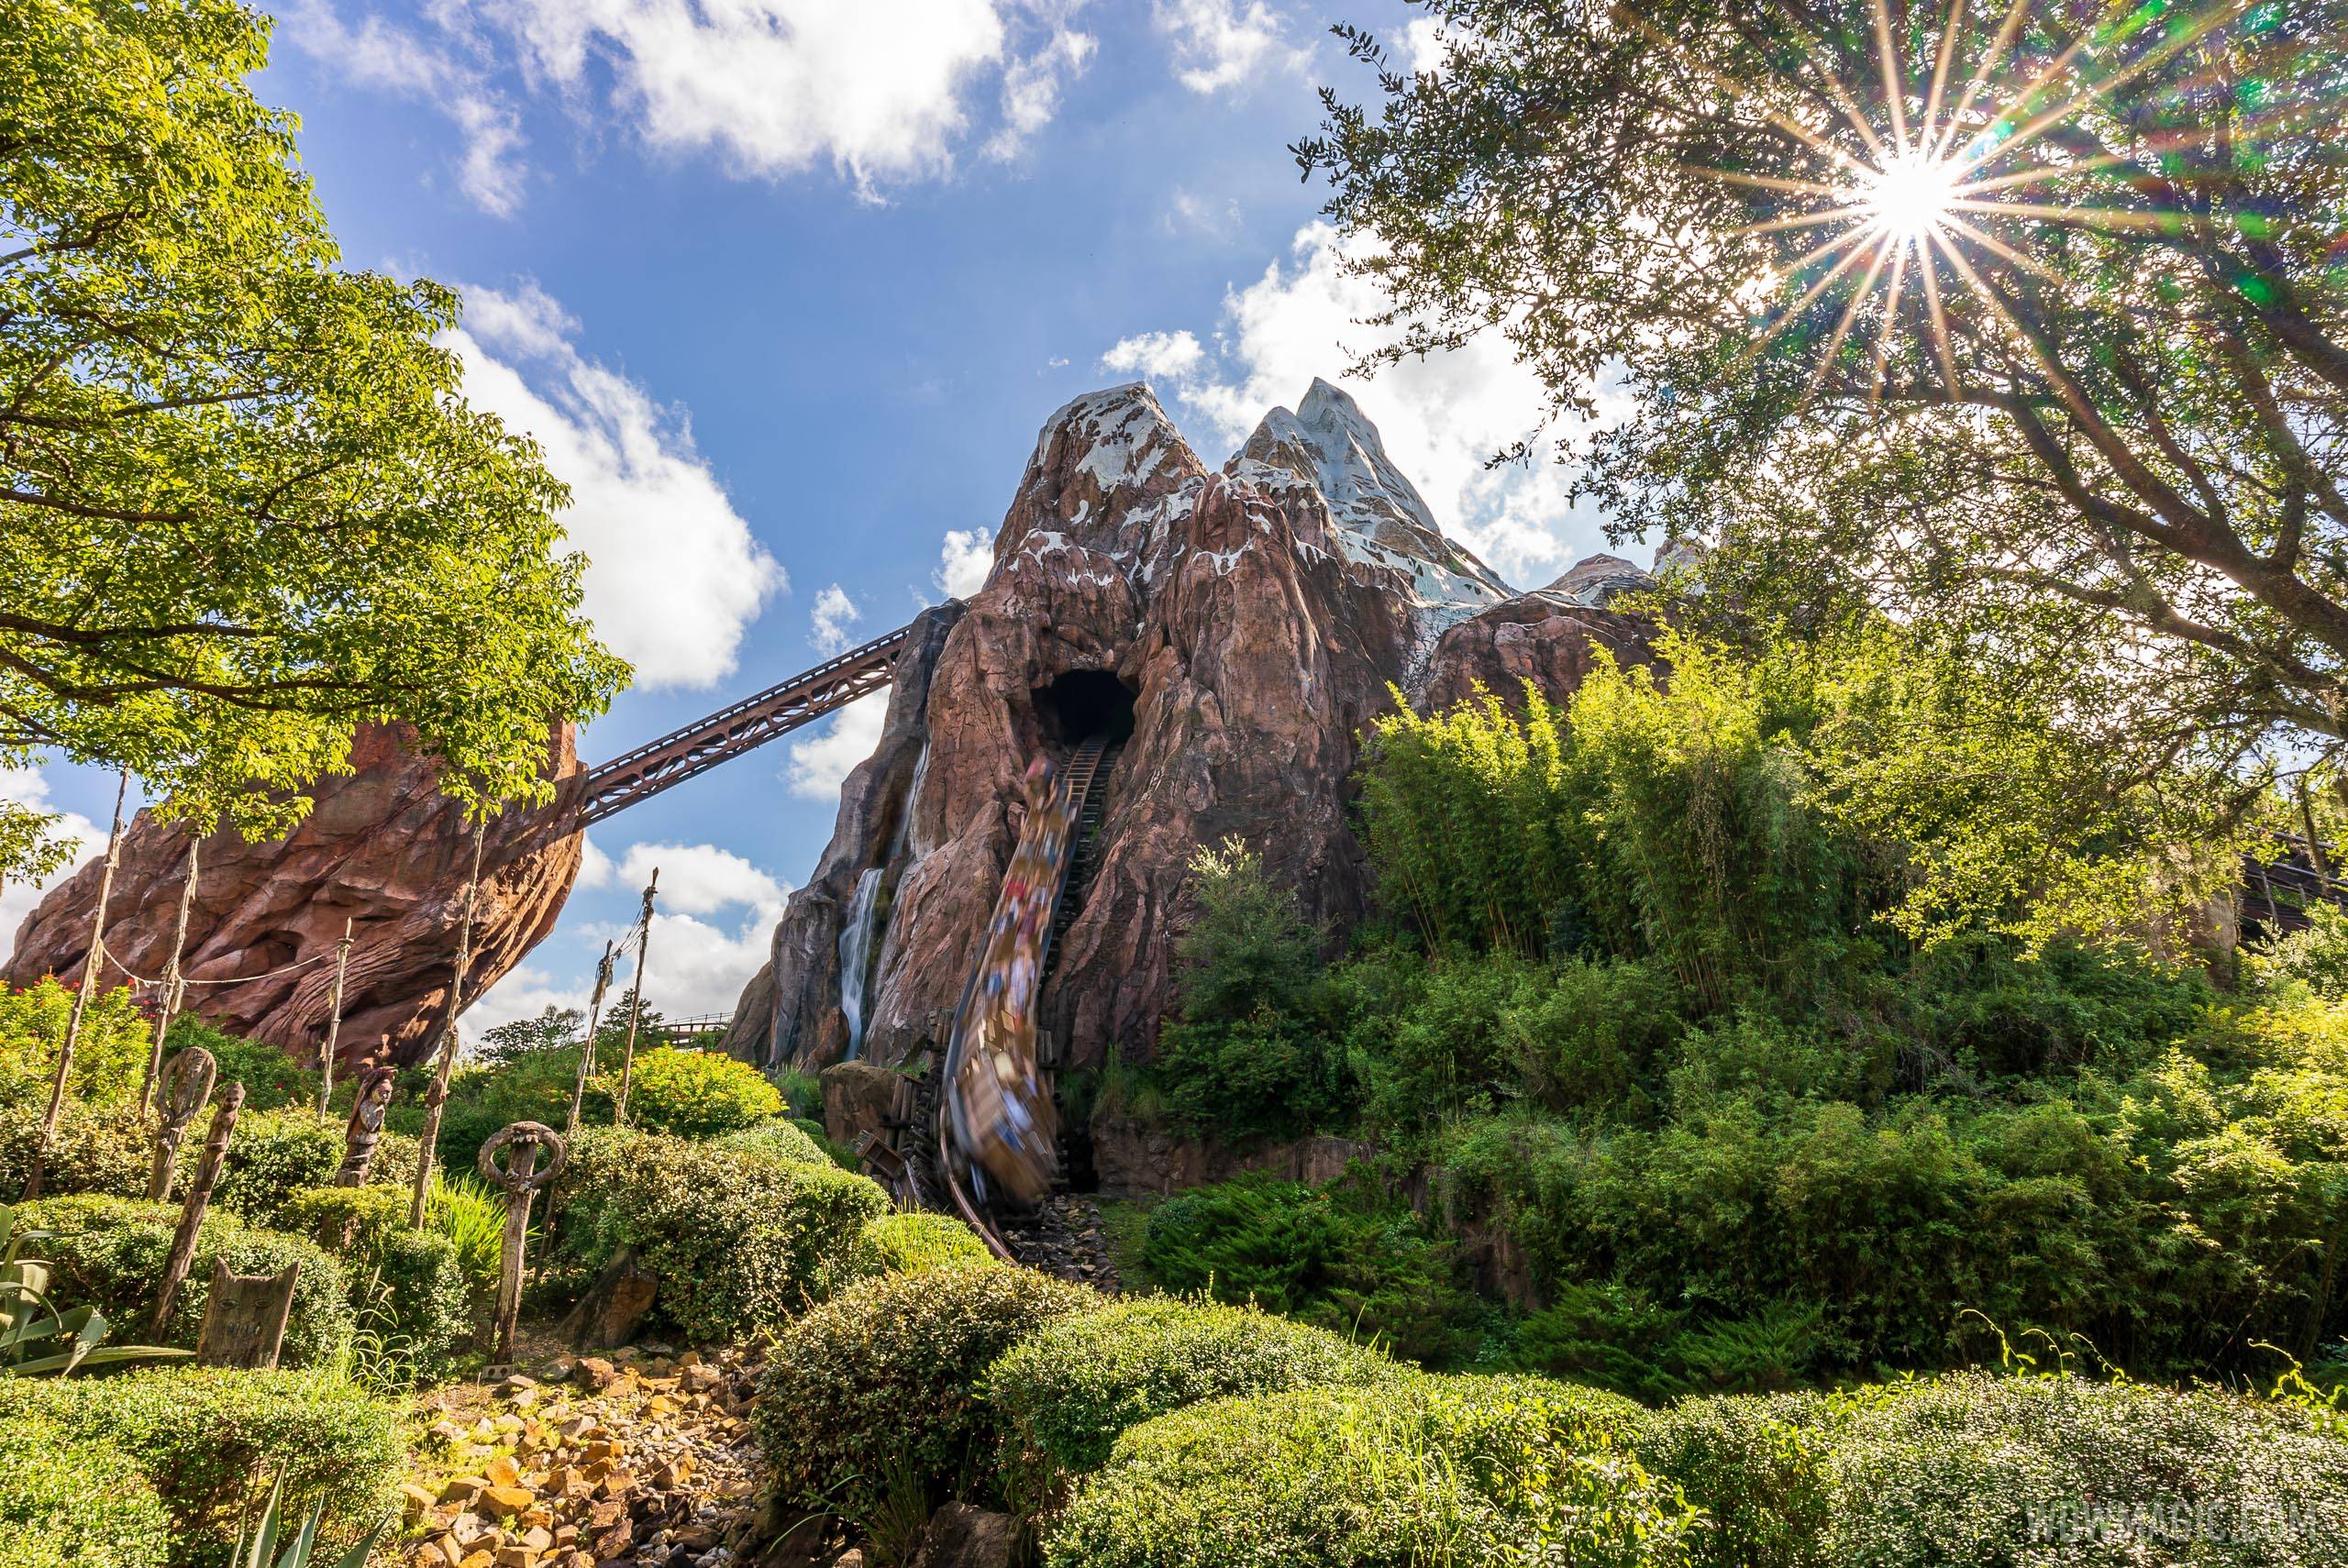 Happy 5th birthday to Expedition Everest